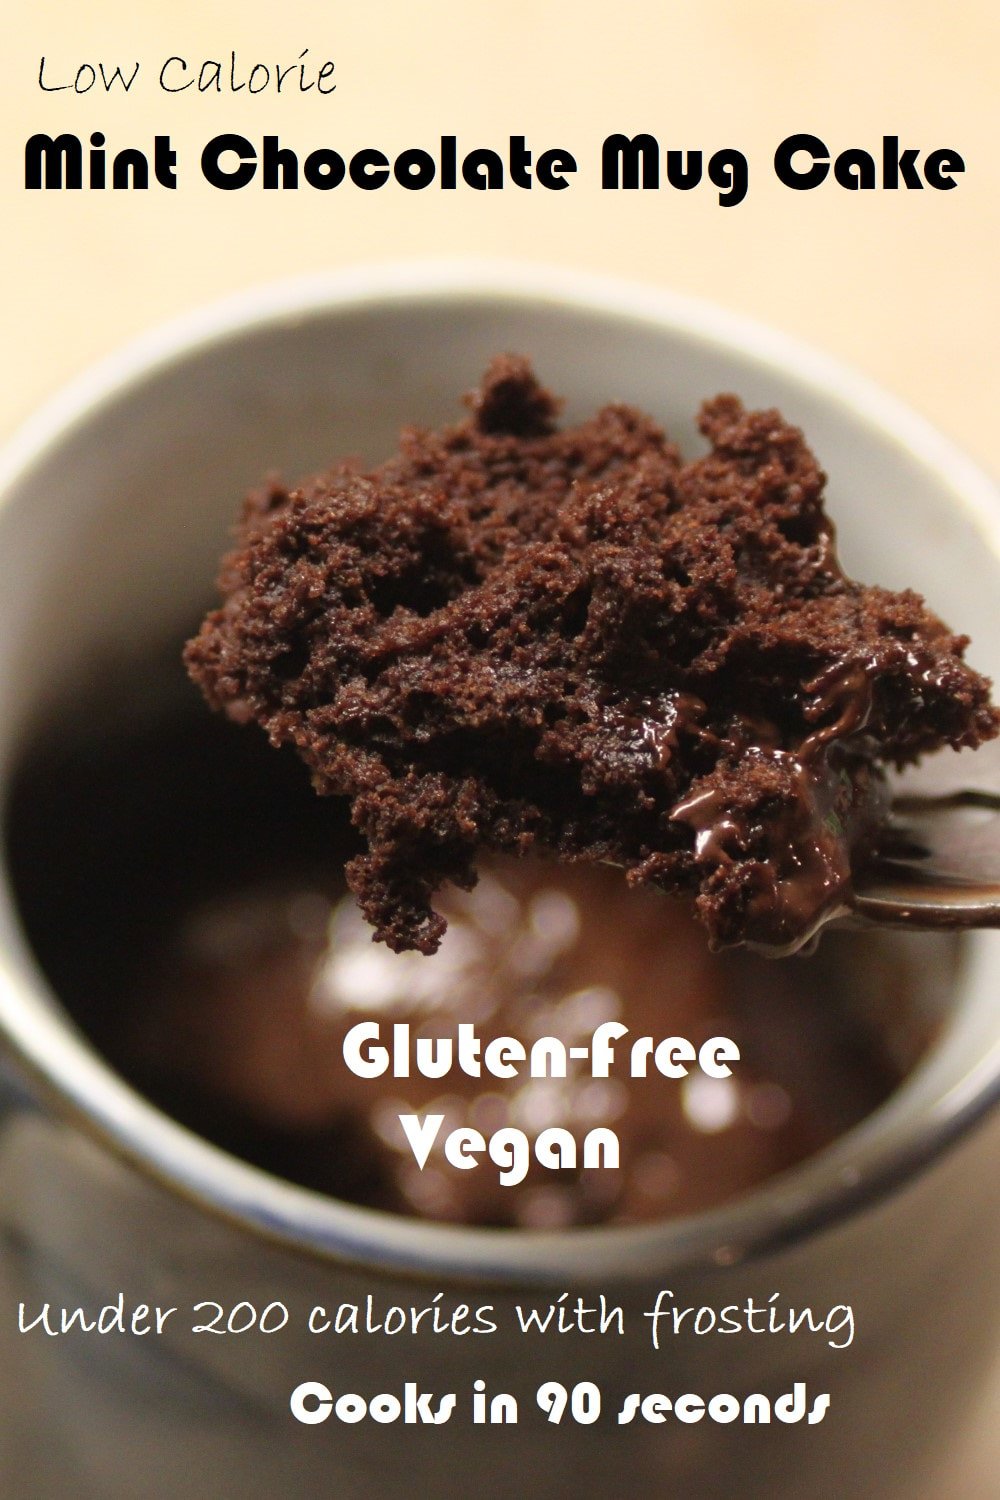 Mint Chocolate Mug Cake Gluten-Free, Vegan, Low-Calorie from whatwordscannotexpress.weebly.com